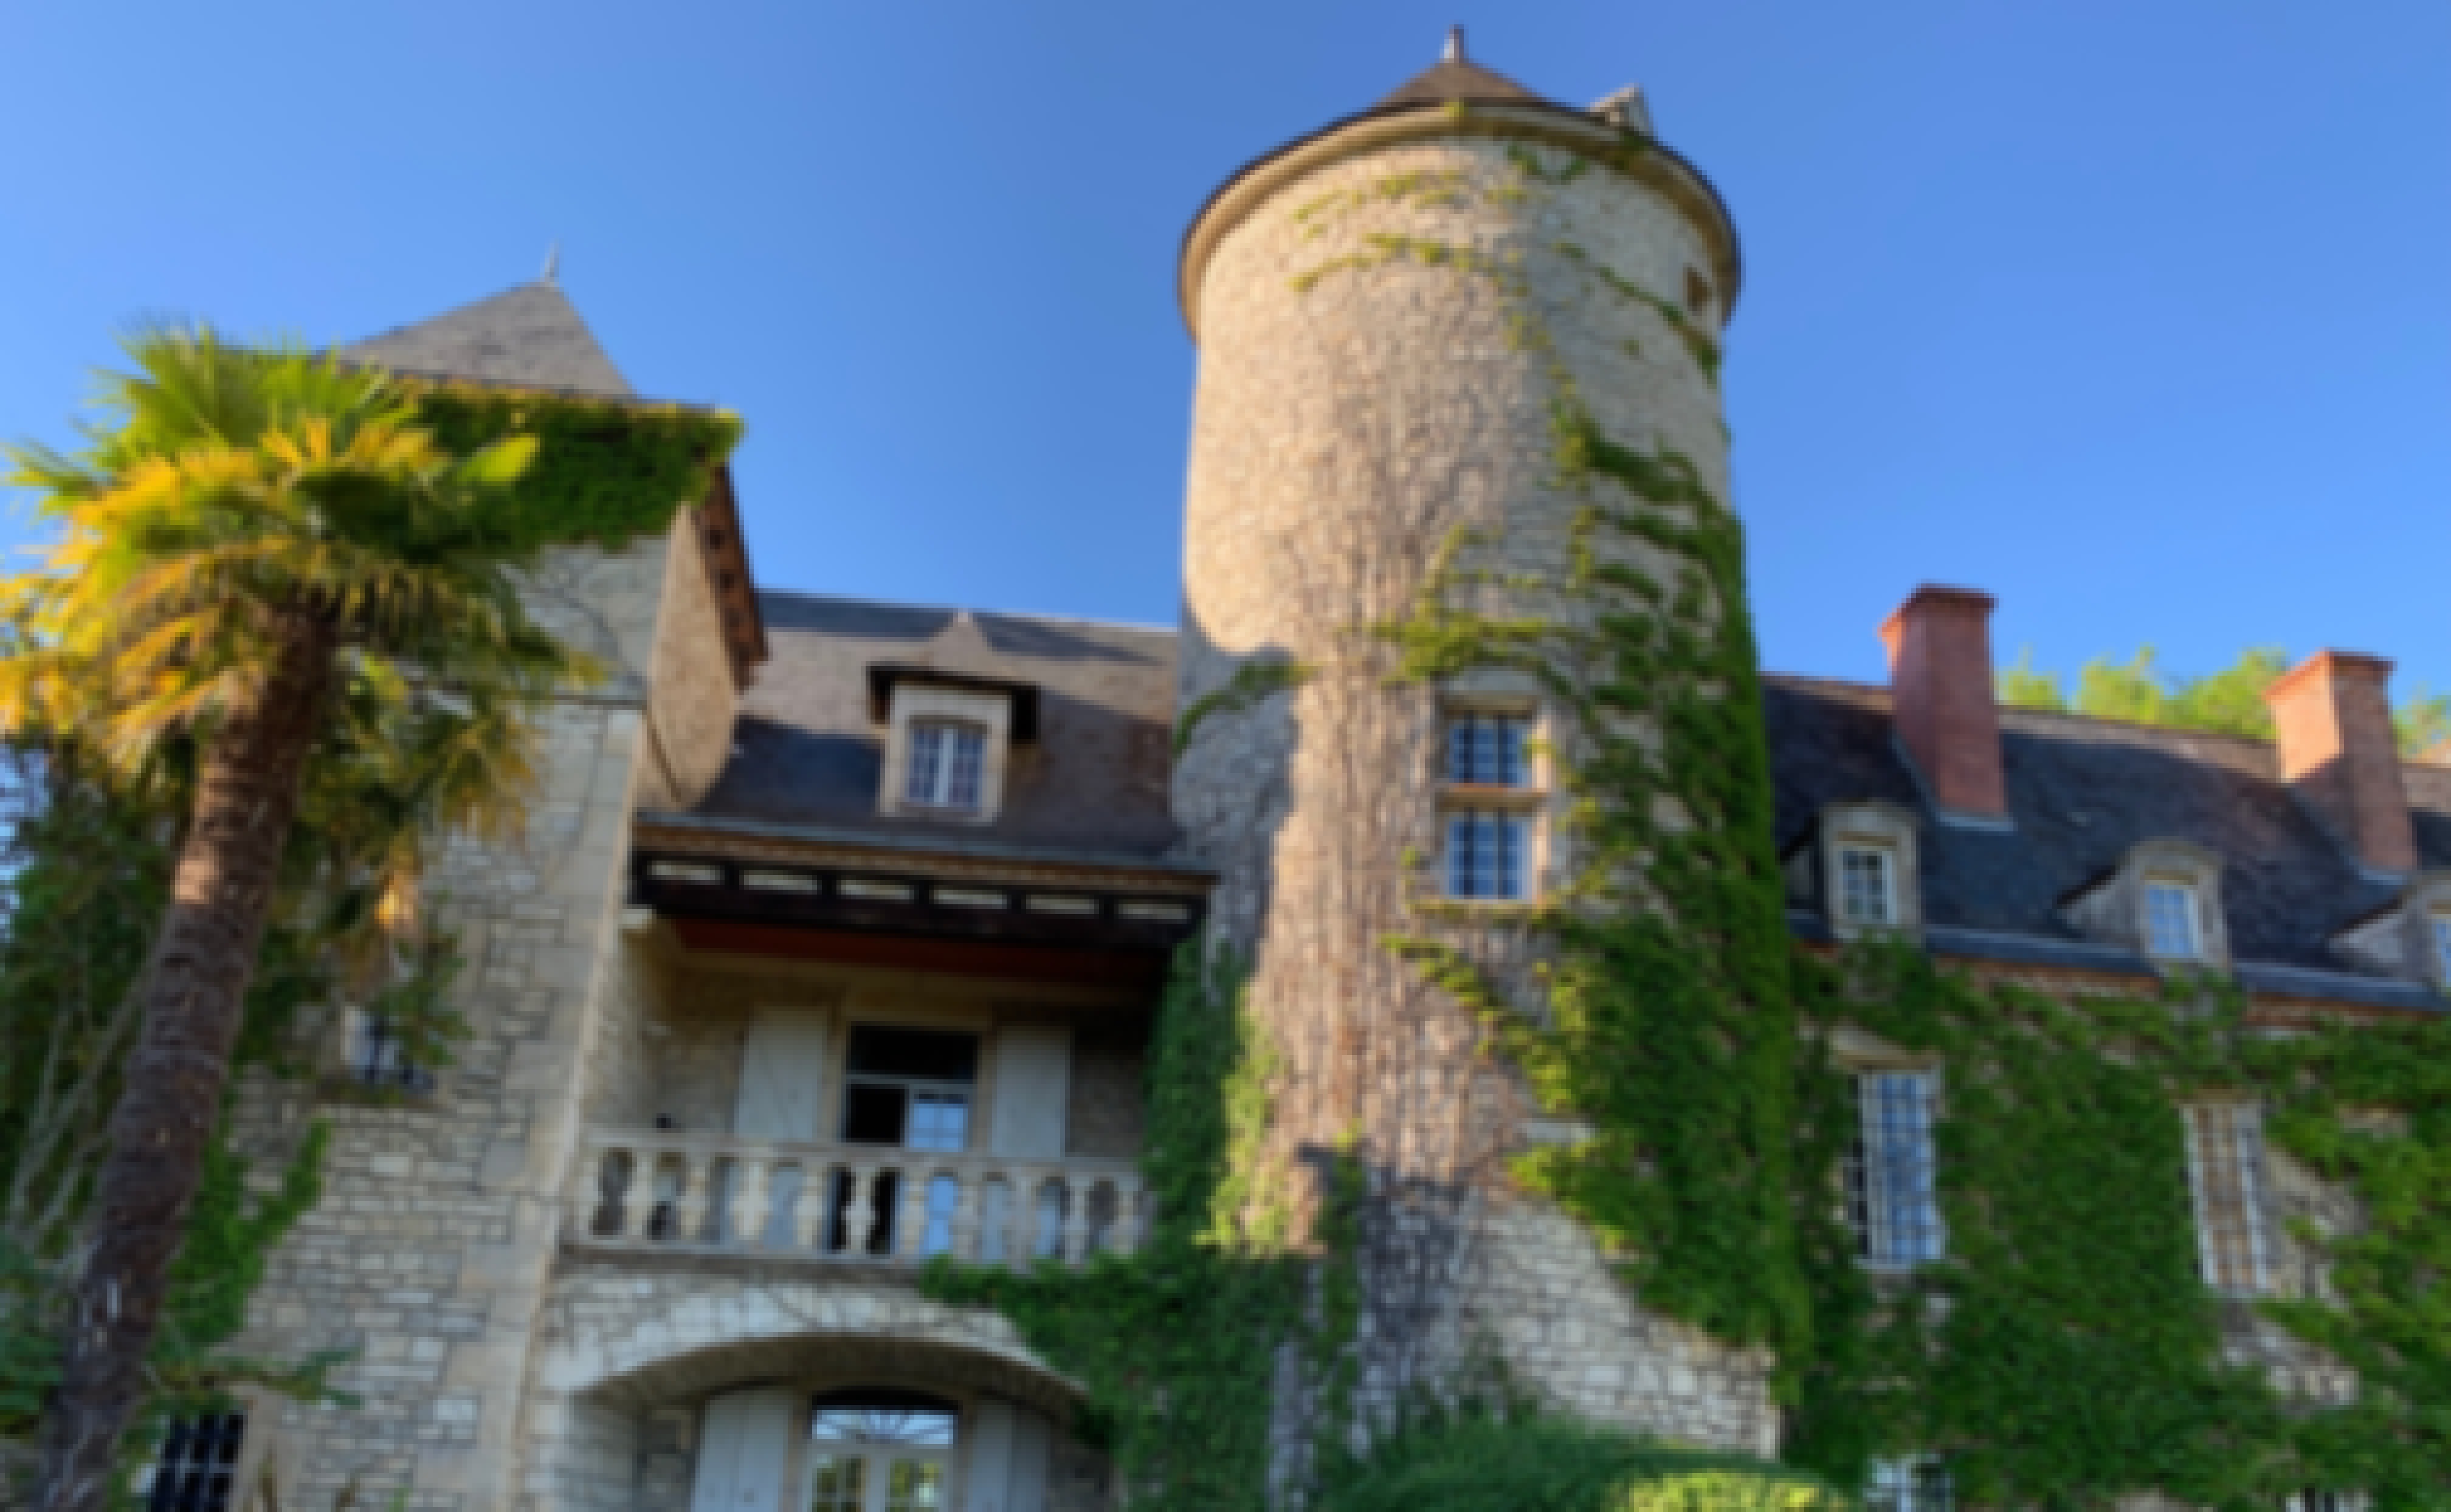 View of the wedding Château du Raysse in the Dordogne Valley in France